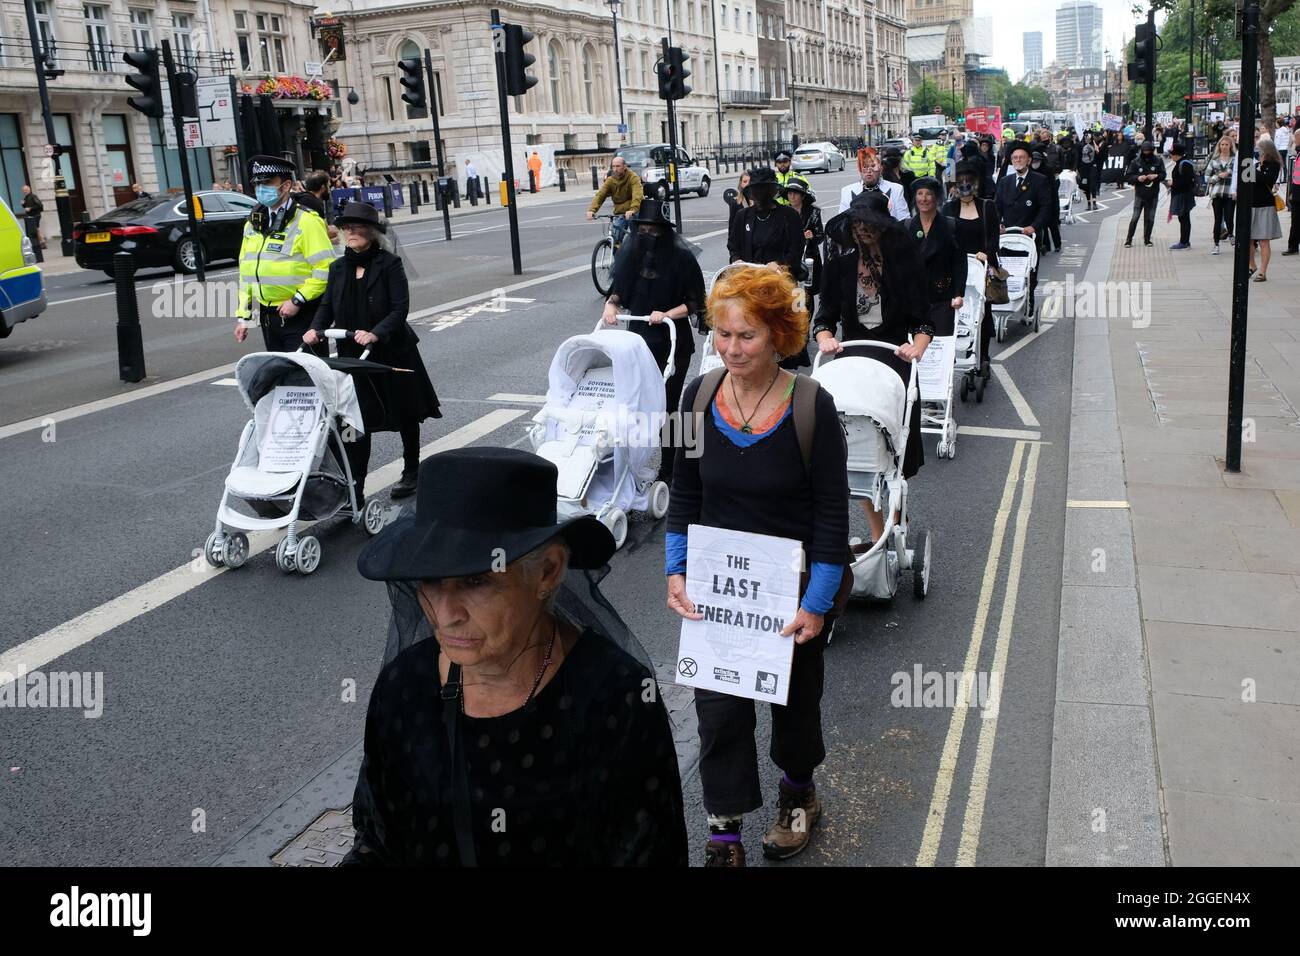 Whitehall, London, UK. 31st August 2021. Members of Extinction Rebellion stage Pram Rebellion Action, marching from Parliament to Trafalgar Square. Credit: Matthew Chattle/Alamy Live News Stock Photo